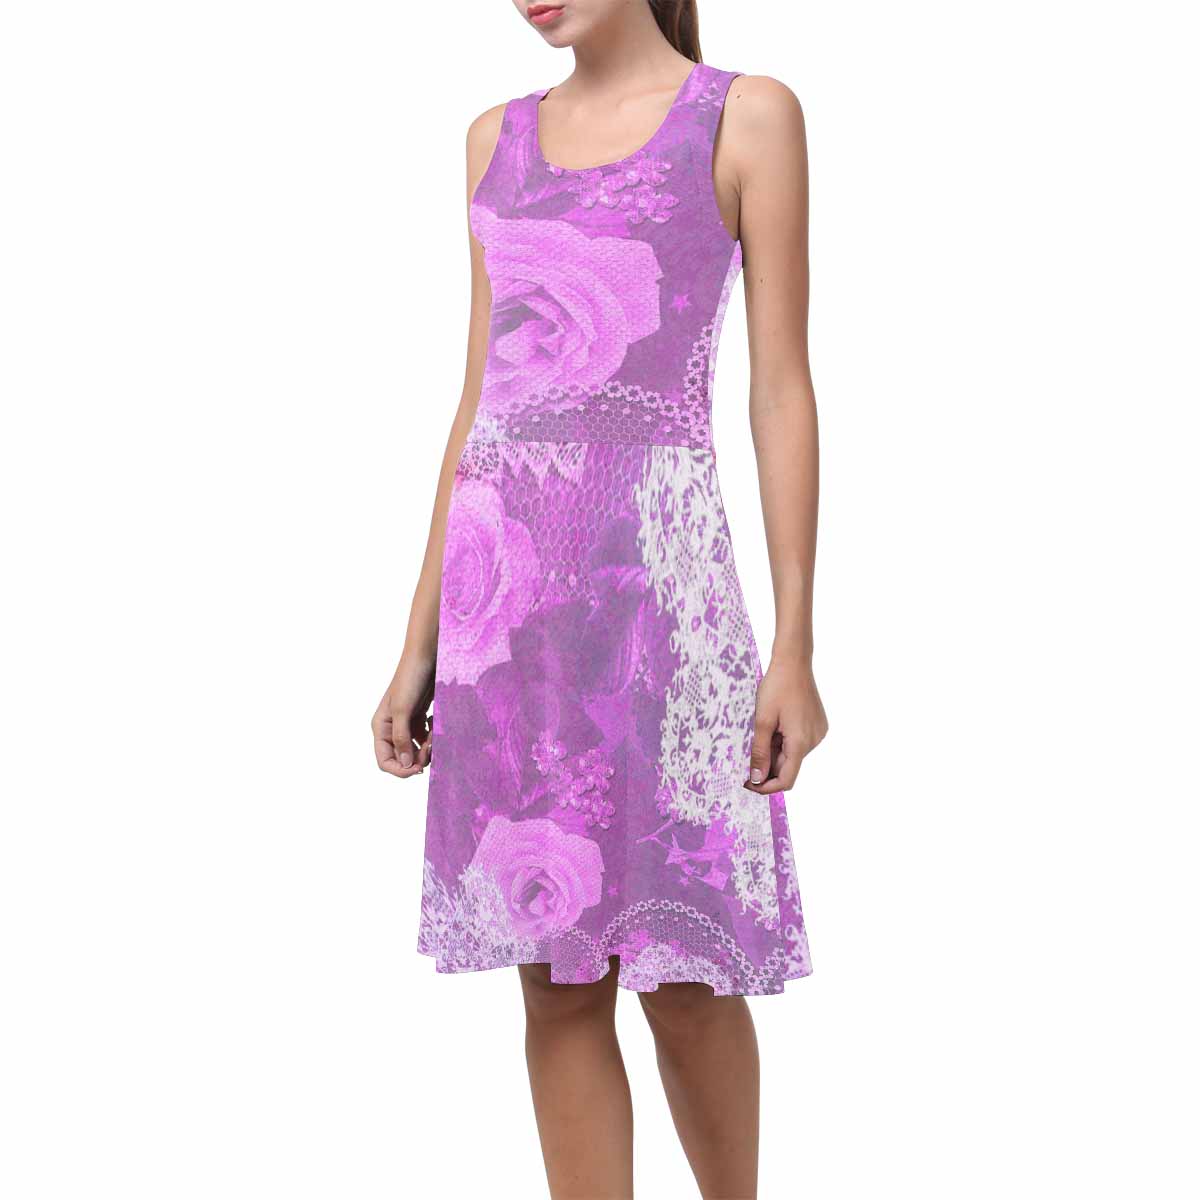 Victorian printed lace summer dress, Design 03